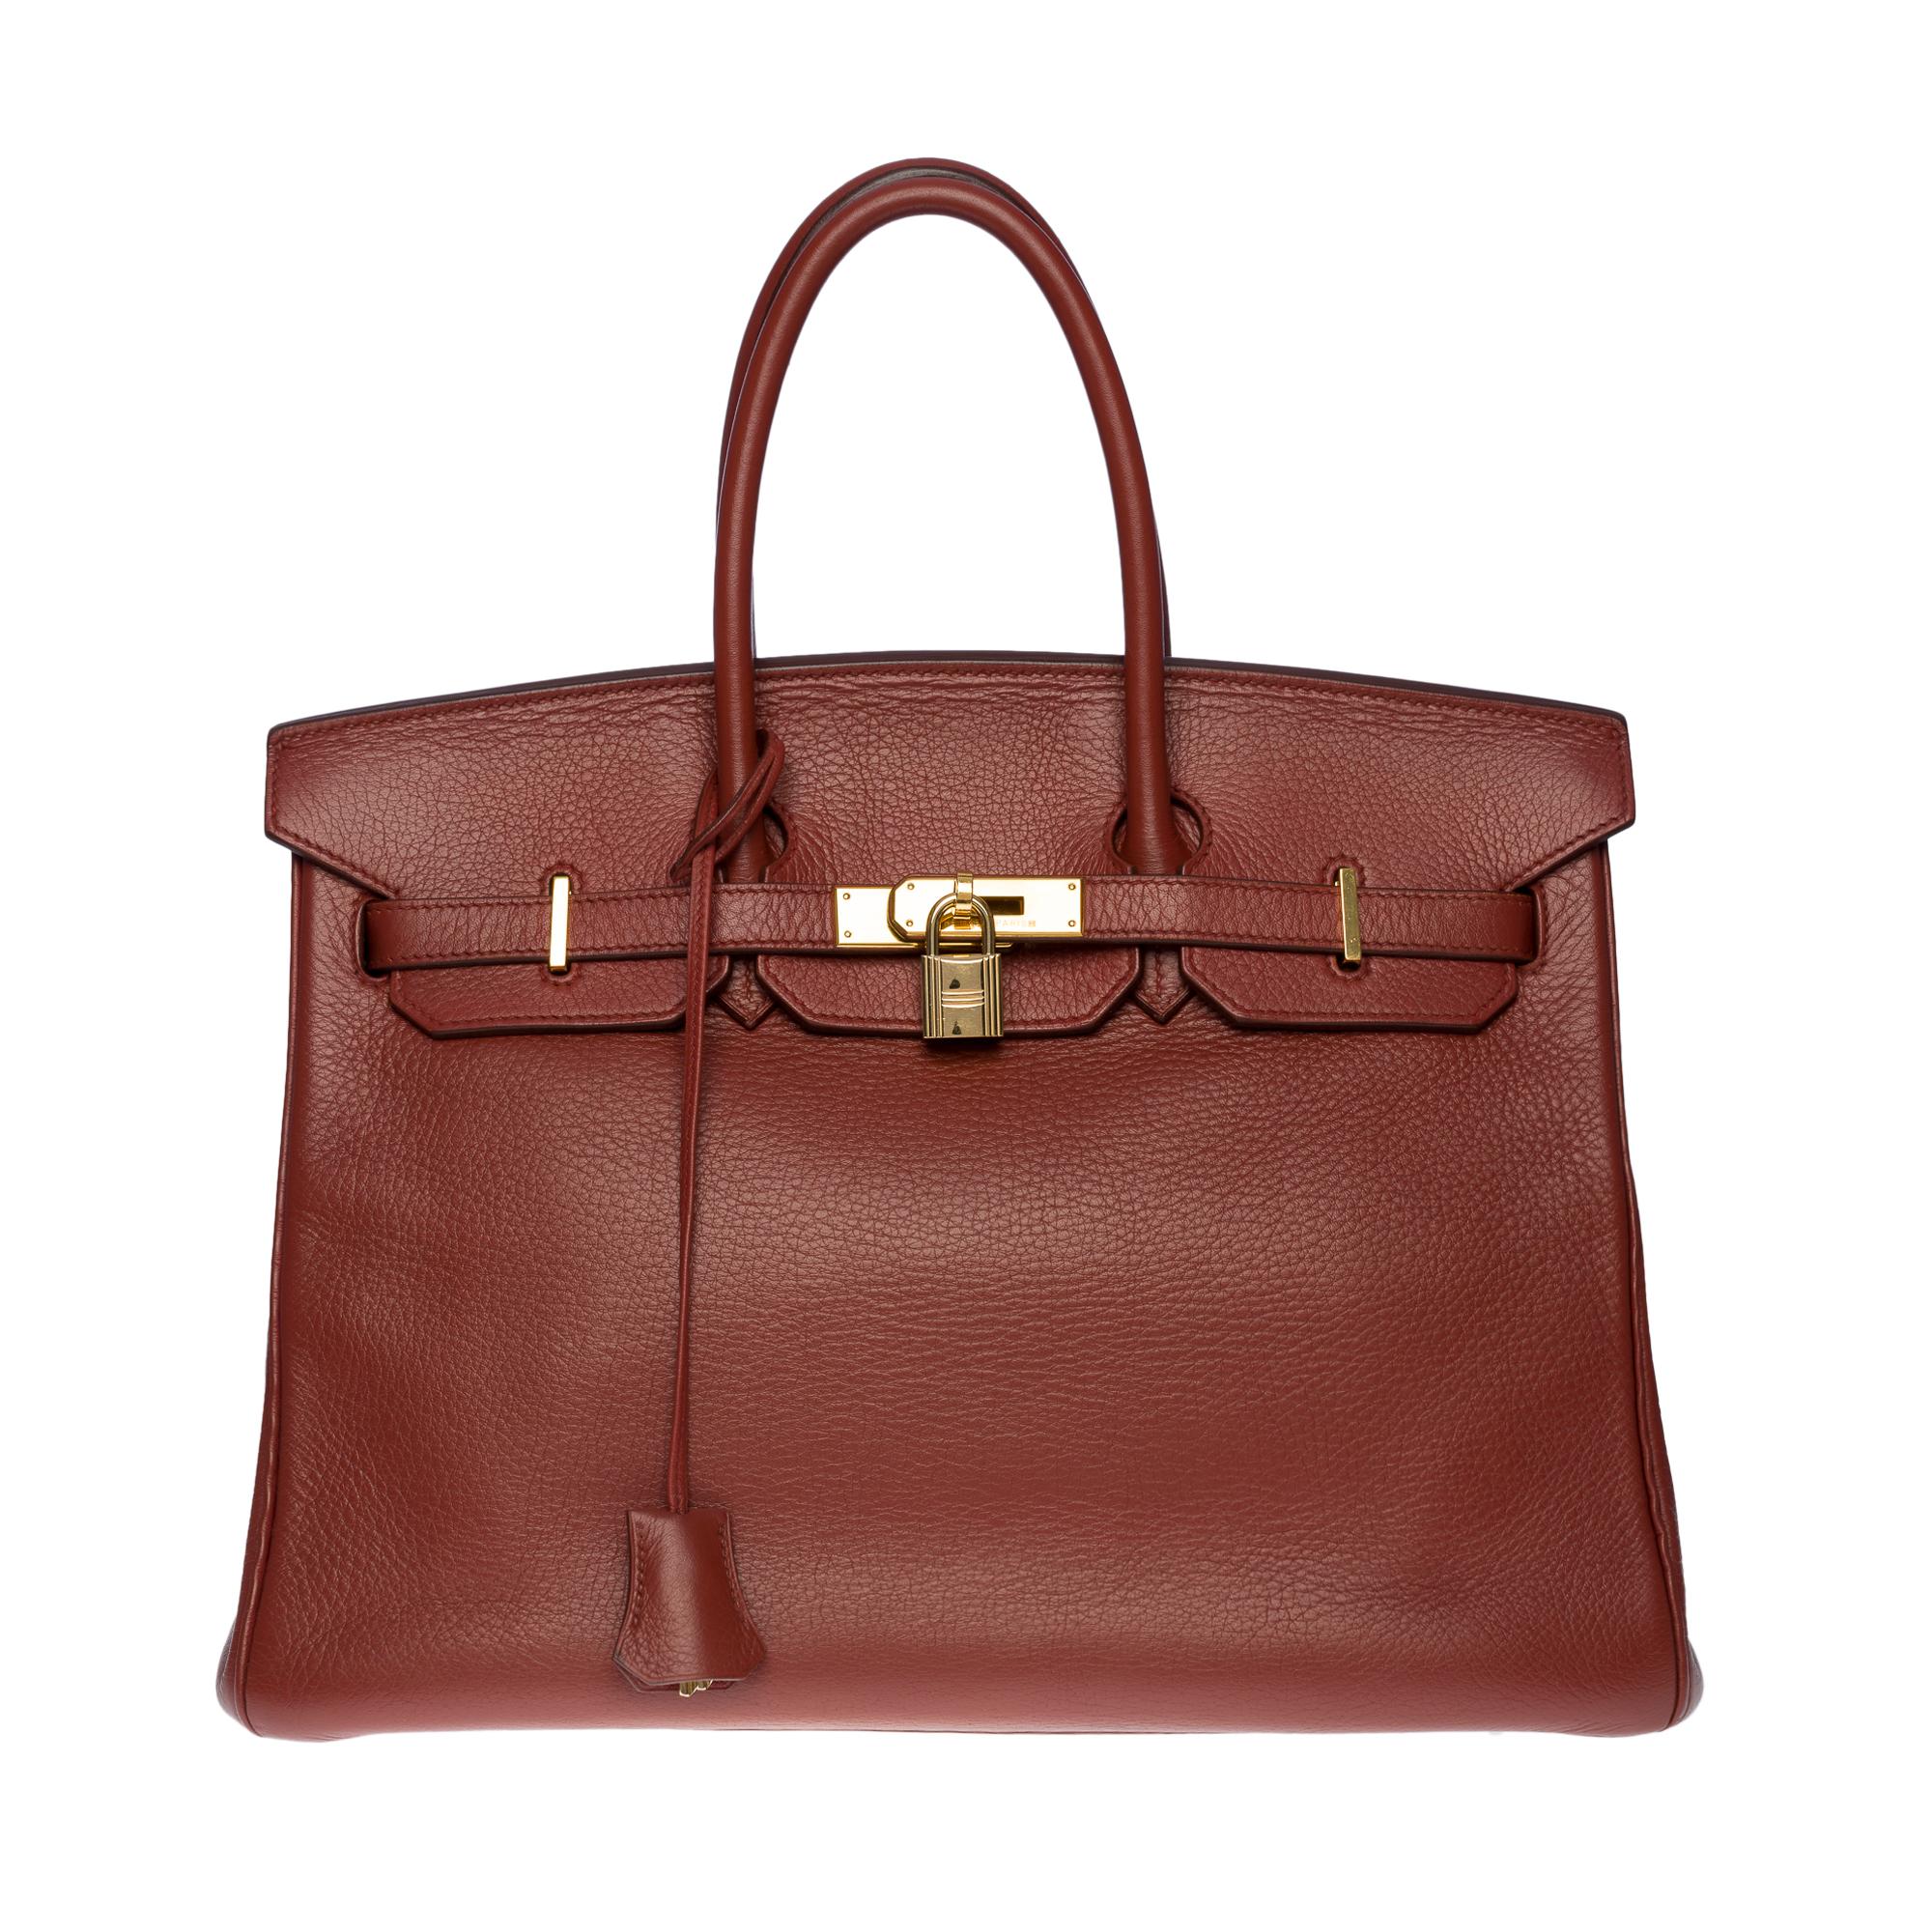 Exquisite Hermes Birkin 35 handbag in Togo Cognac leather, gold plated metal hardware, double cognac leather handle allowing a hand-held

Flap closure
Cognac leather lining, one zippered pocket, one patch pocket
Signature: 